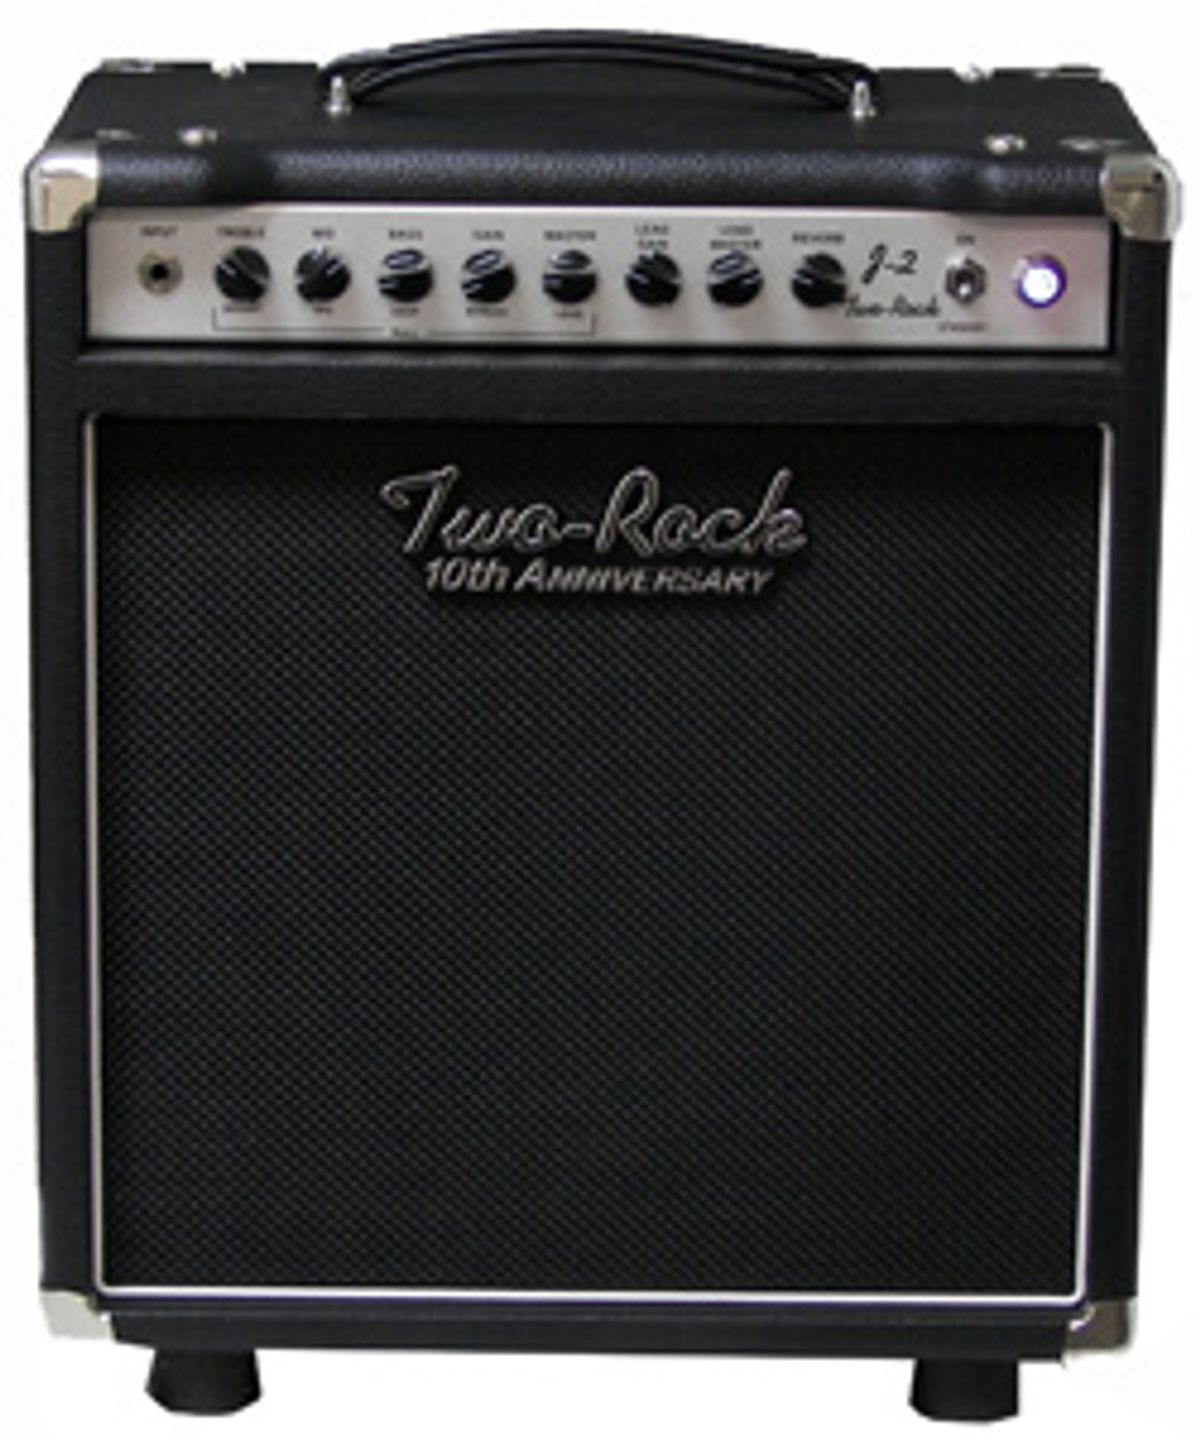 Two-Rock Introduces J-2 Limited-Edition Anniversary Amp